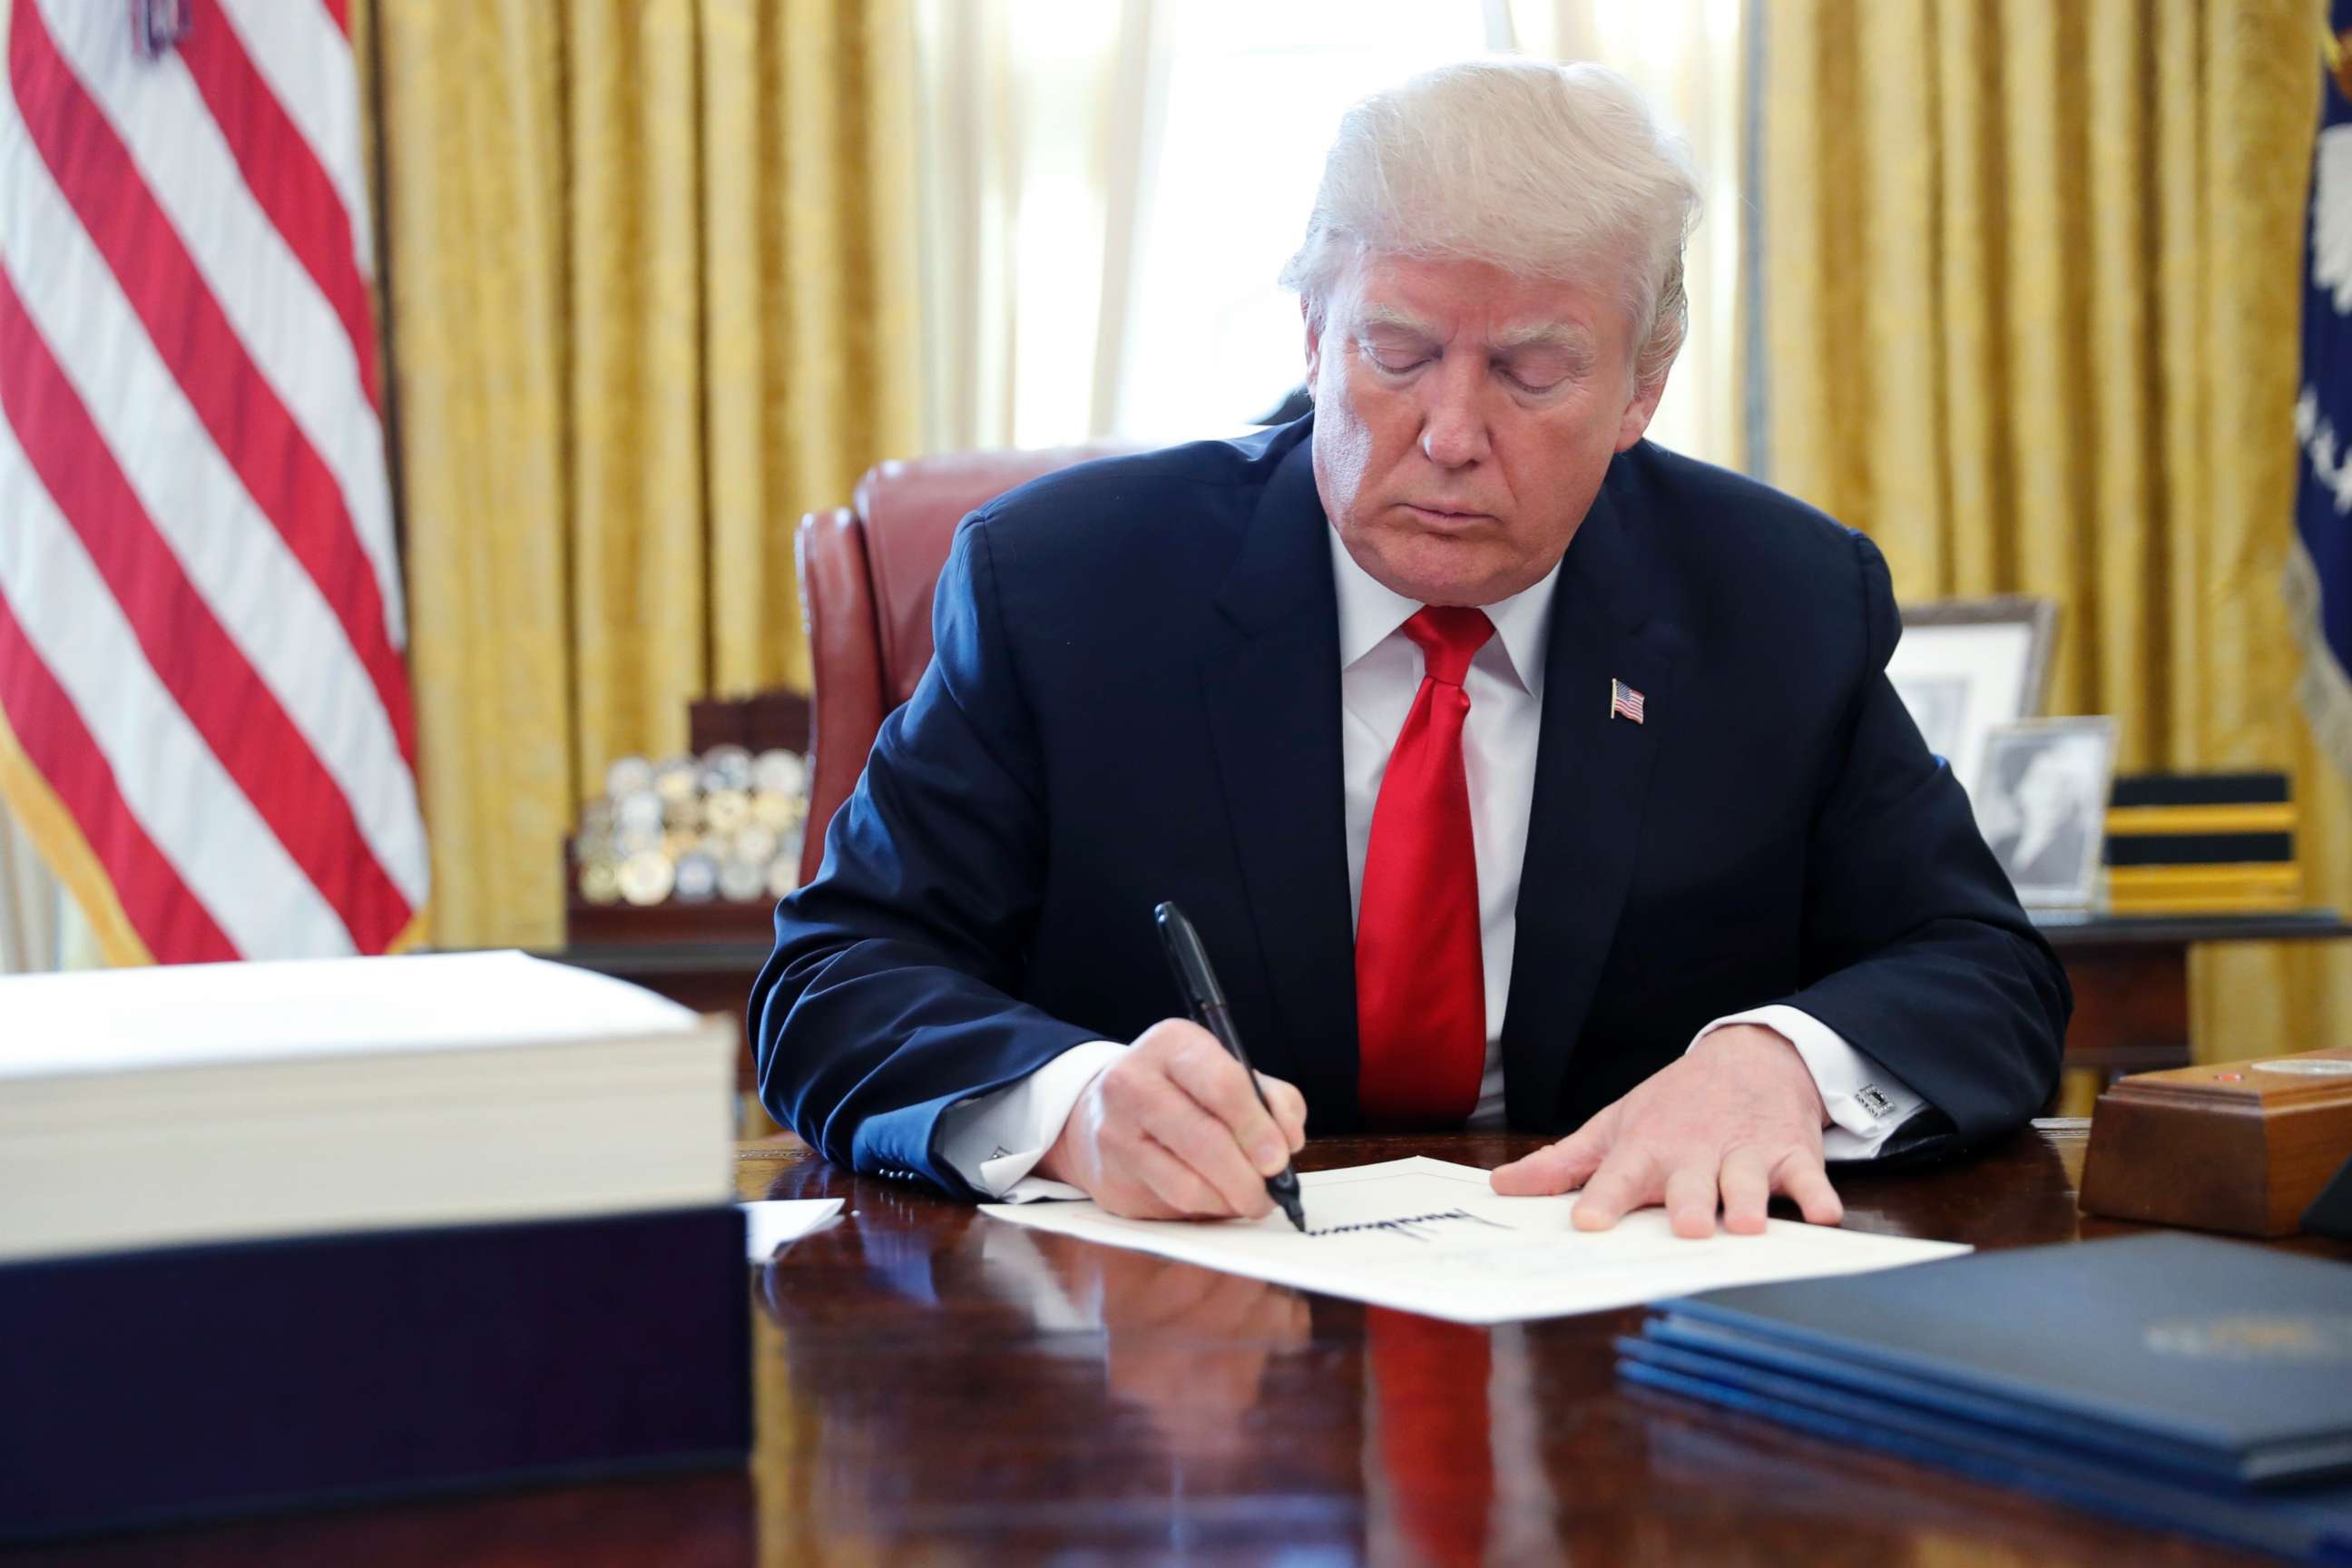 PHOTO: President Donald Trump signs the $1.5 trillion tax overhaul plan in the Oval Office of the White House in Washington, Dec. 22, 2017.